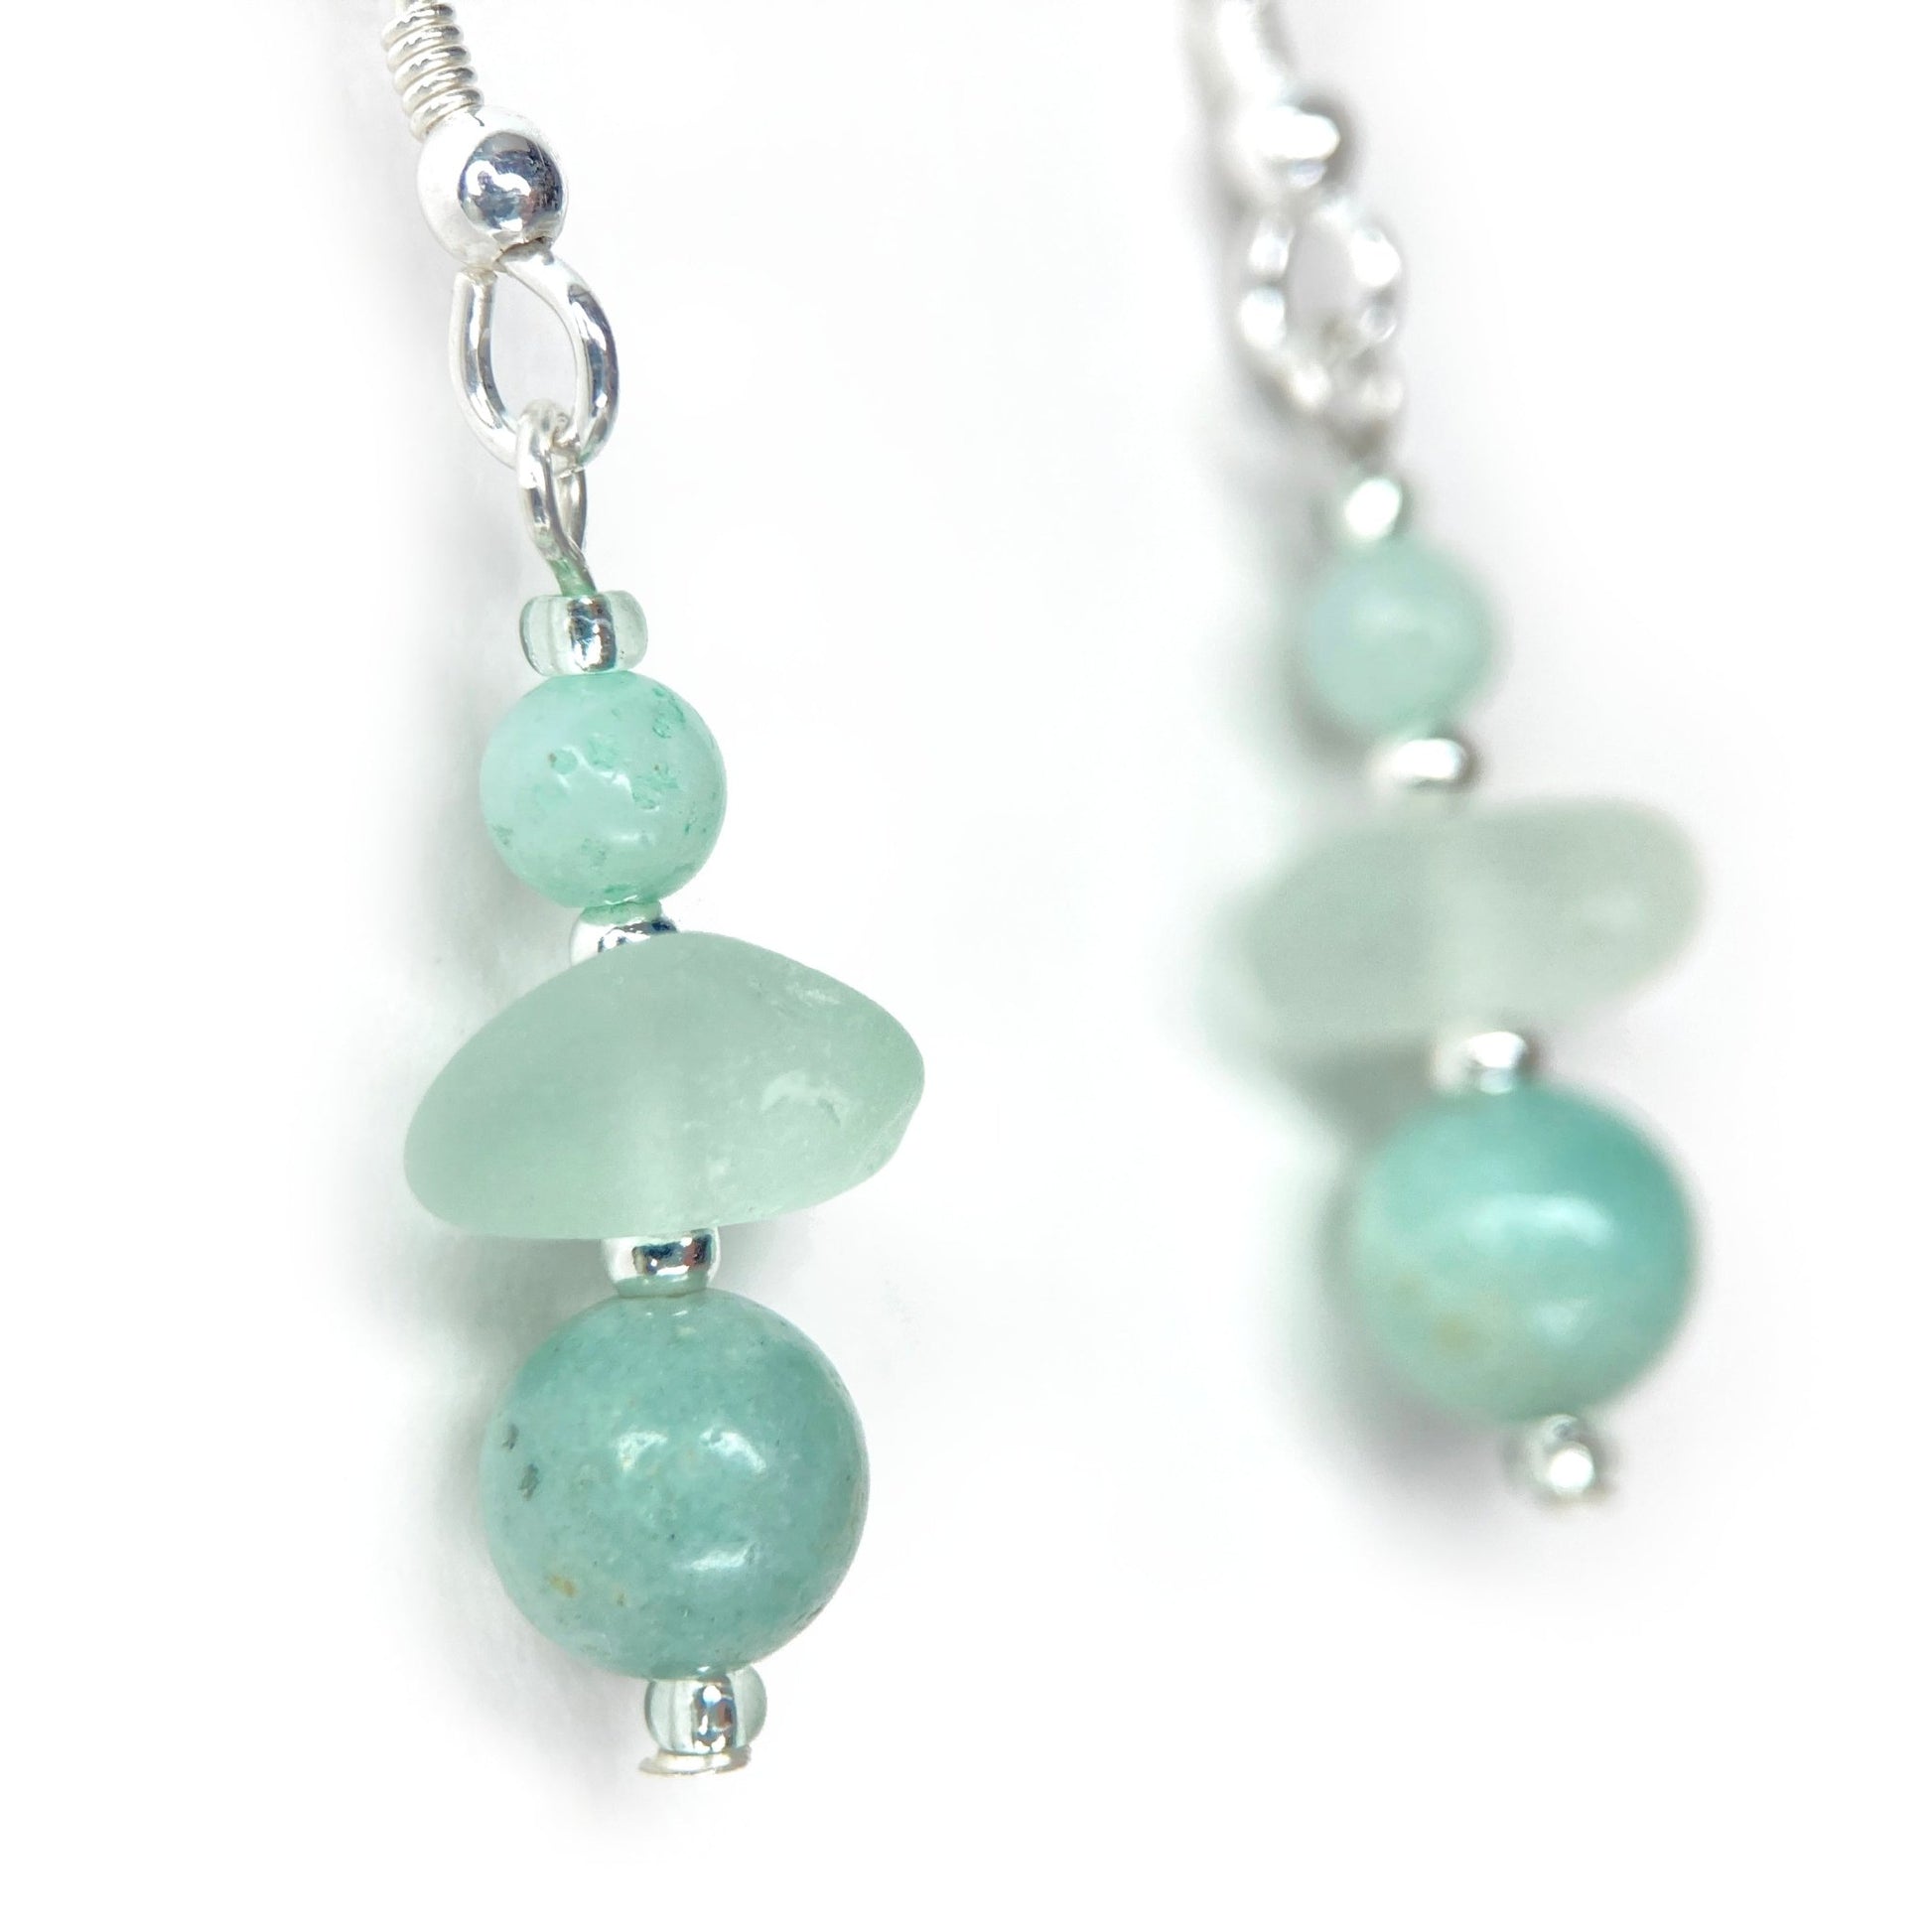 Green Sea Glass Earrings - Sterling Silver Beaded Earrings with Amazonite Crystal - East Neuk Beach Crafts